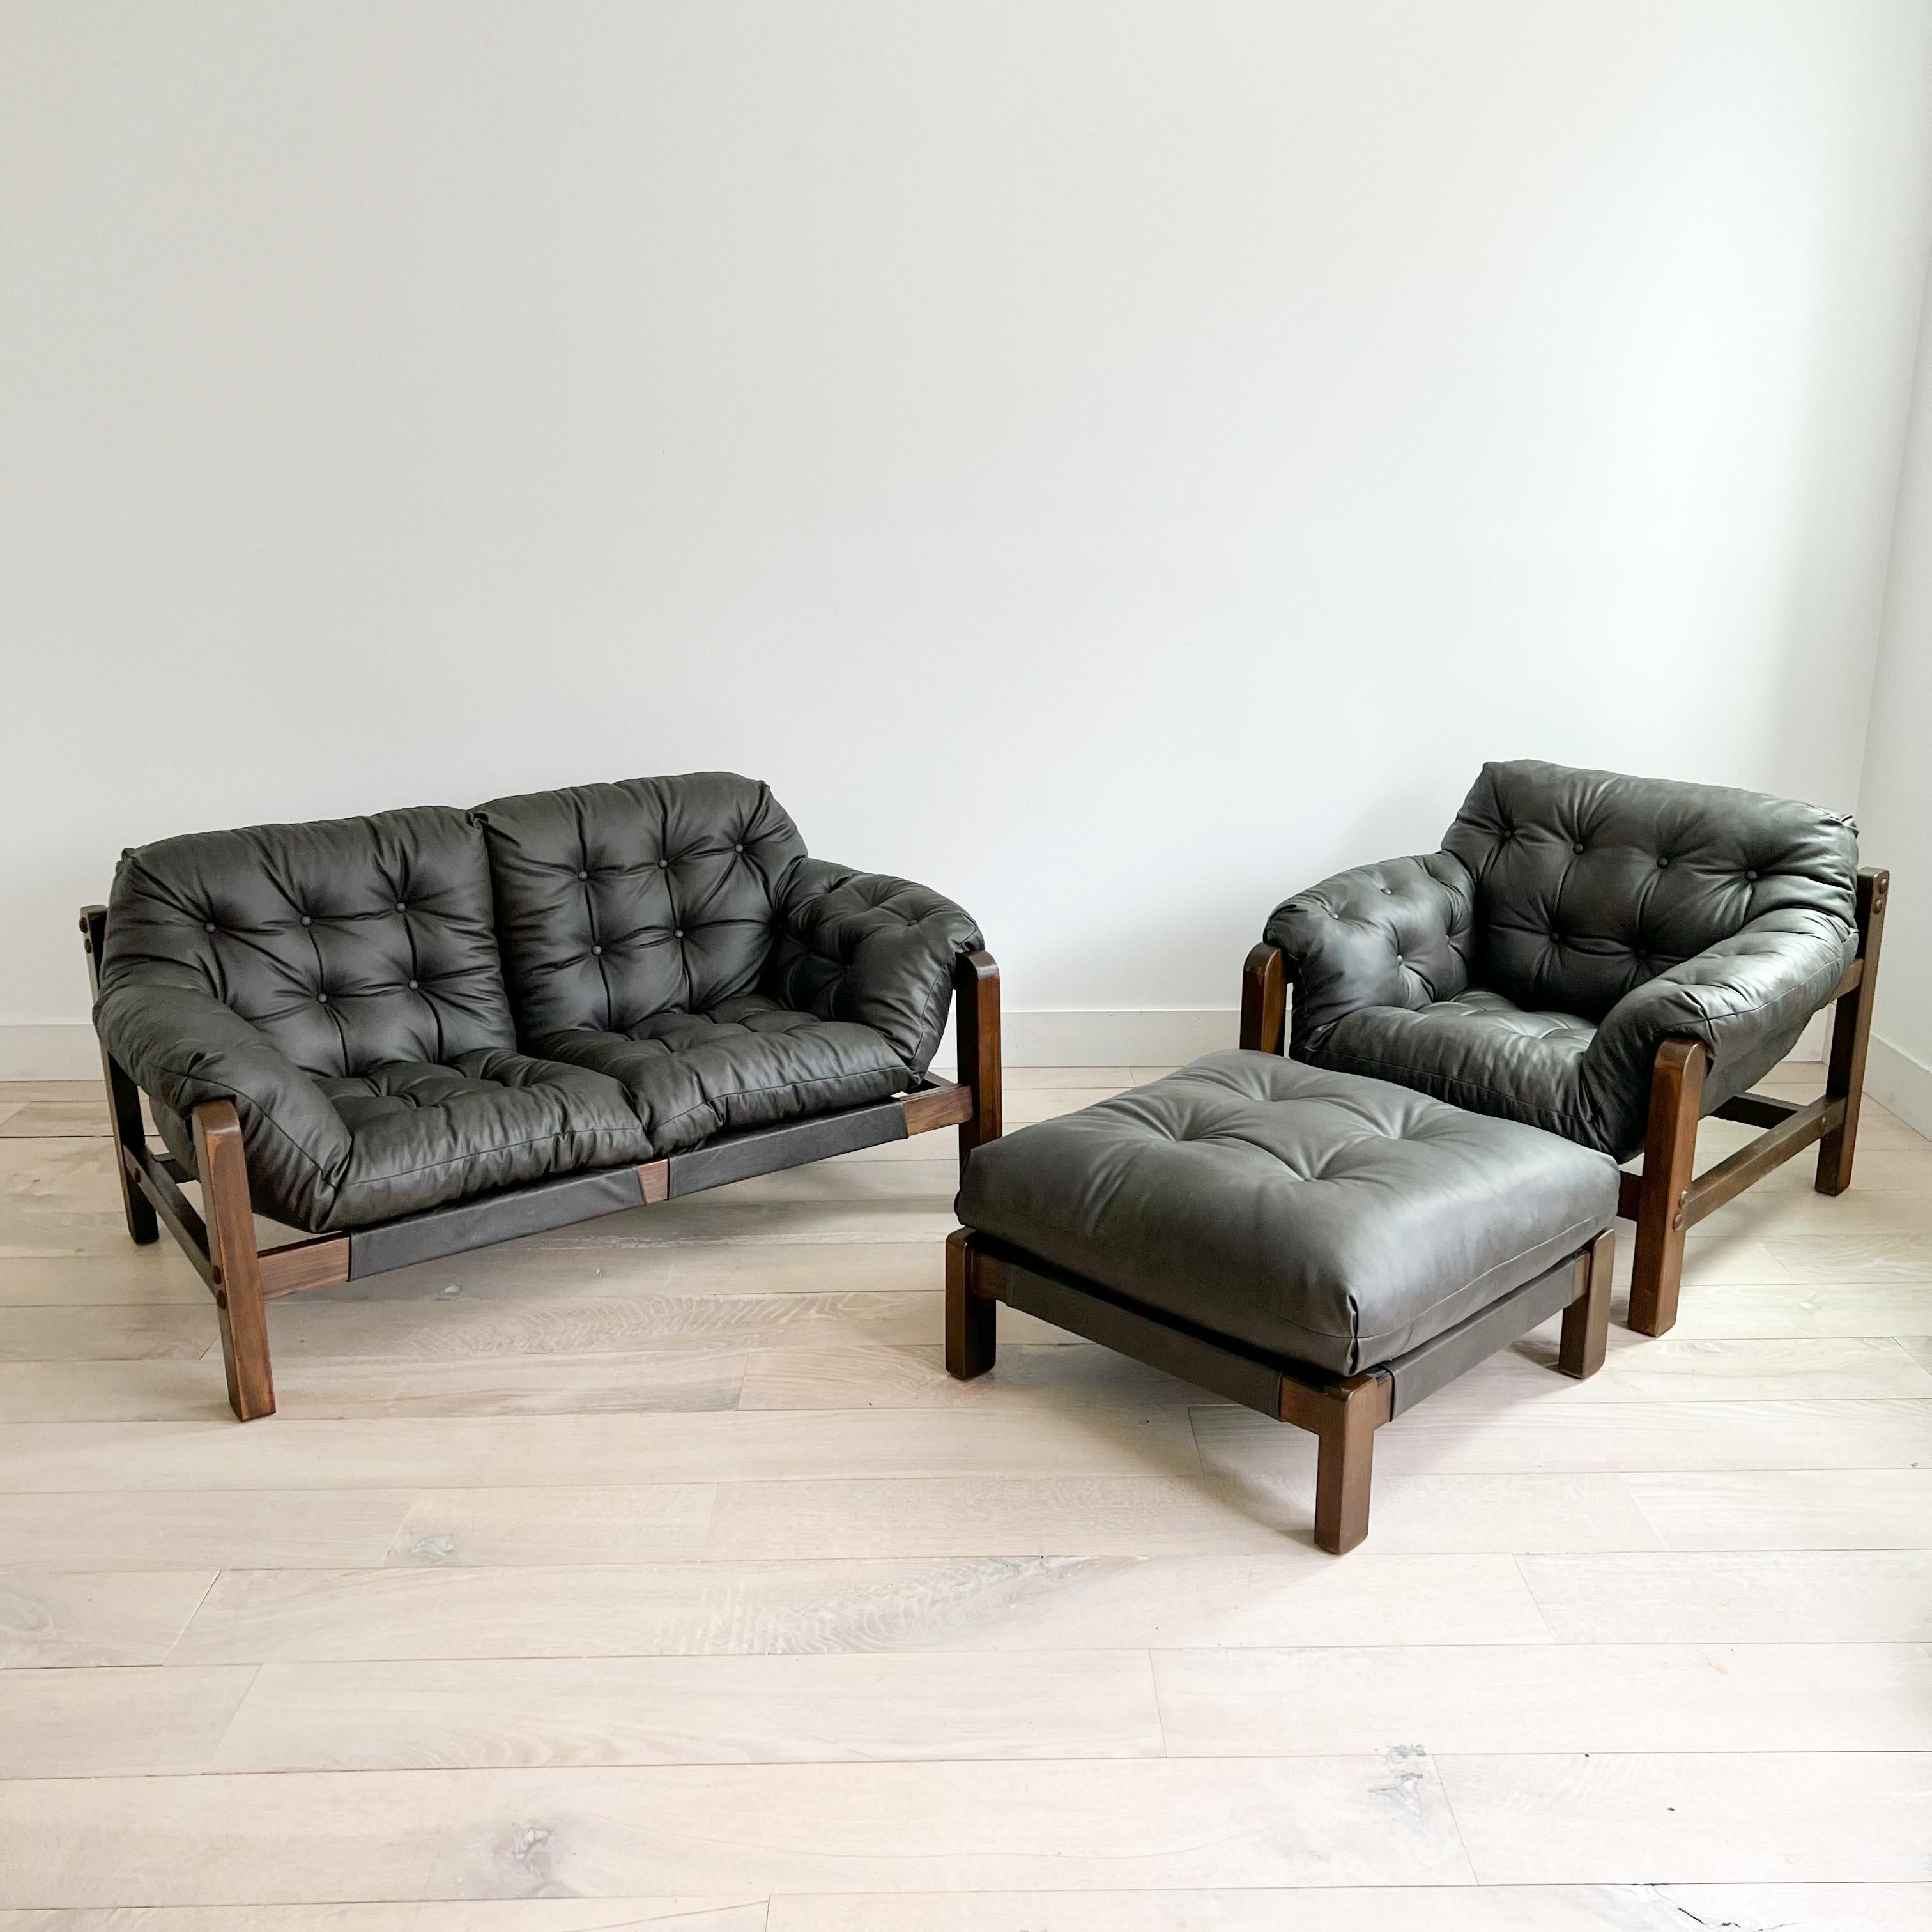 Mid-Century Modern sofa loveseat, lounge chair and ottoman set. New tufted brown leather upholstery! Super comfortable set. Some light scuffing/scratching to the wooden frames from age appropriate wear.

Measures: Chair - 37”x35” 16”SH